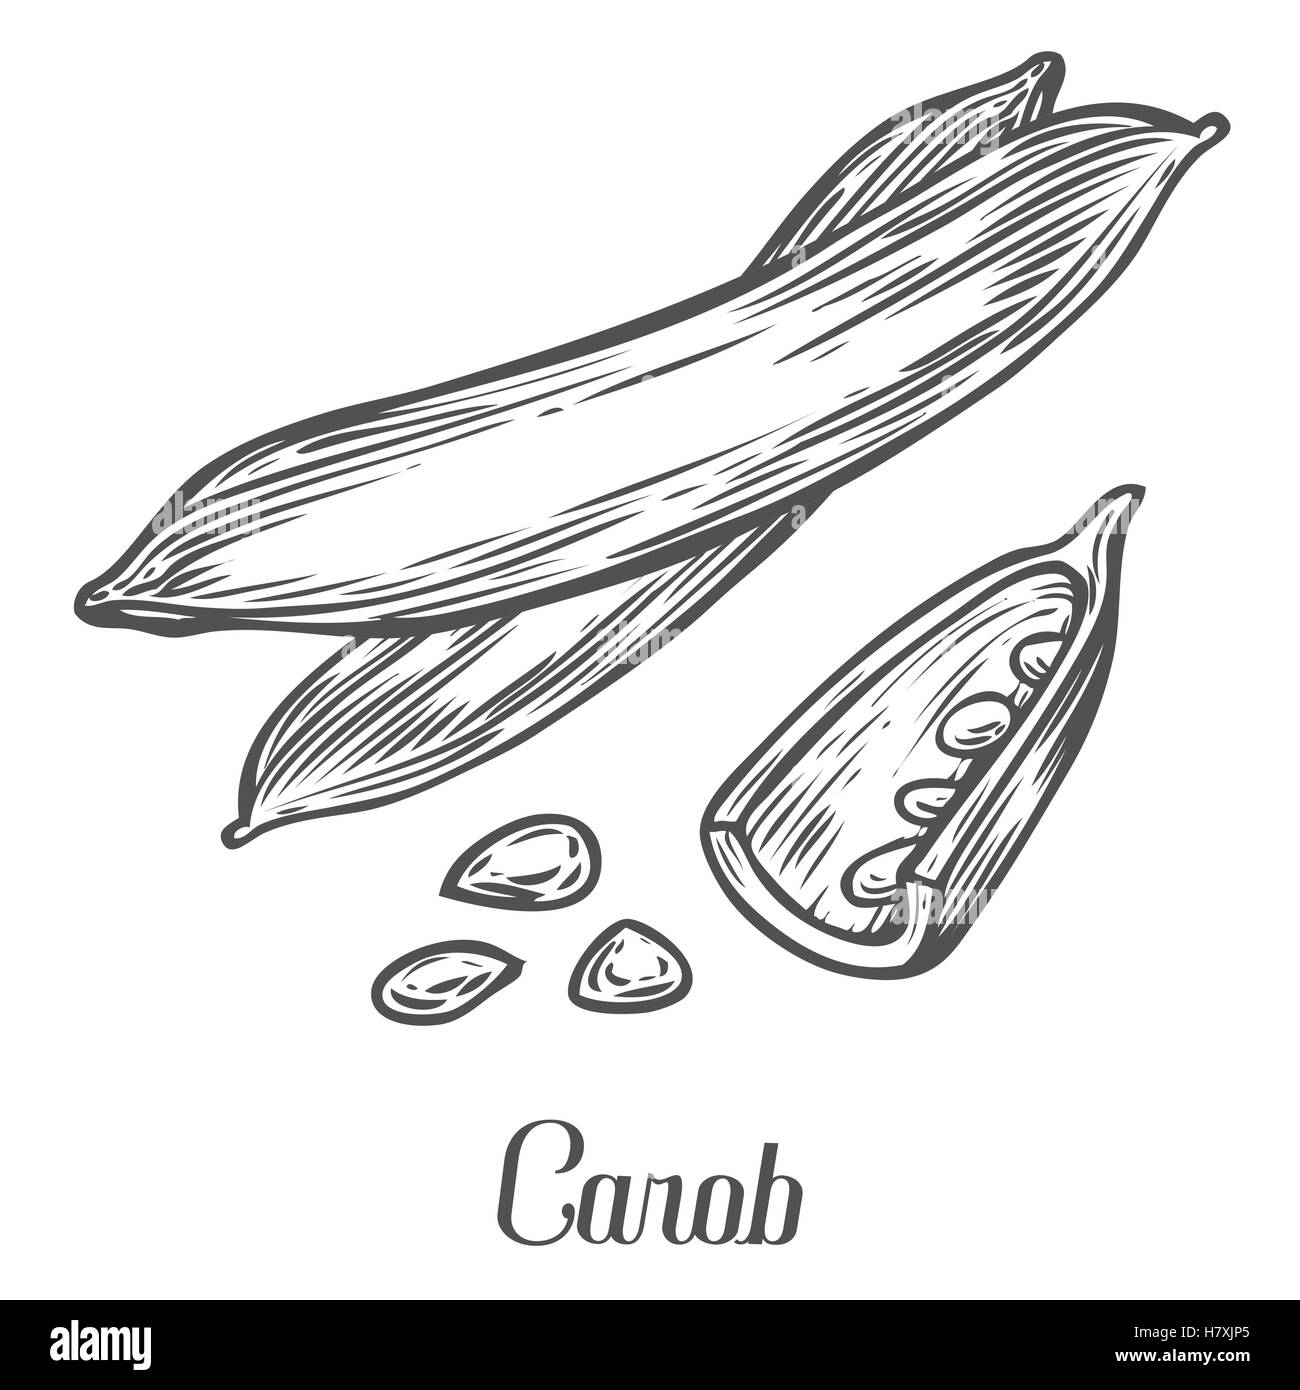 Carob pods, leaves, beans super food. Hand drawn sketch engraving illustration. Used for the production of carob powder. Vegetar Stock Vector